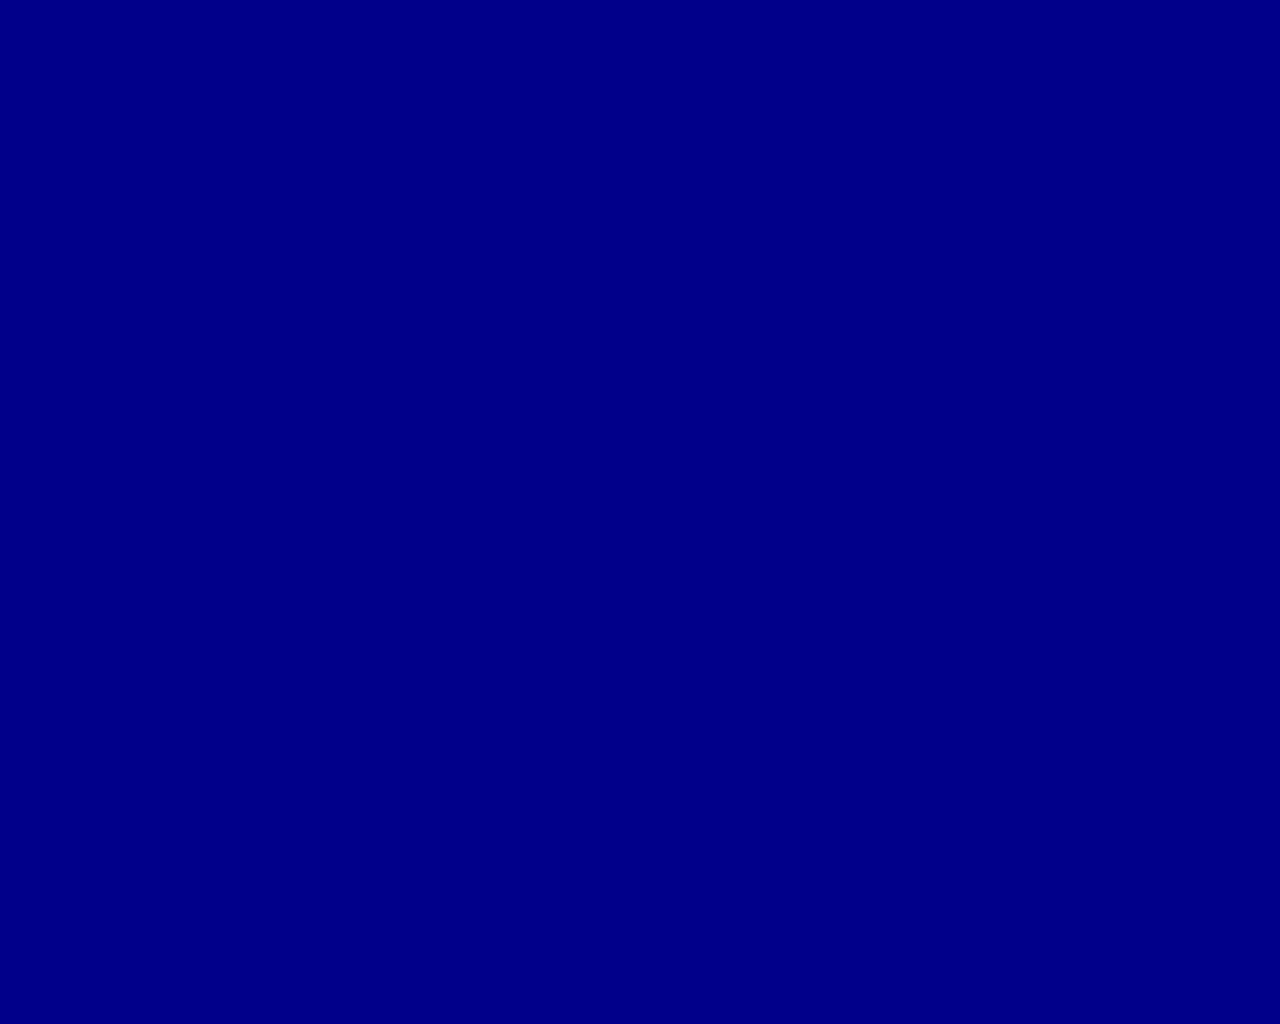 Free 1280x1024 resolution Dark Blue solid color background view and